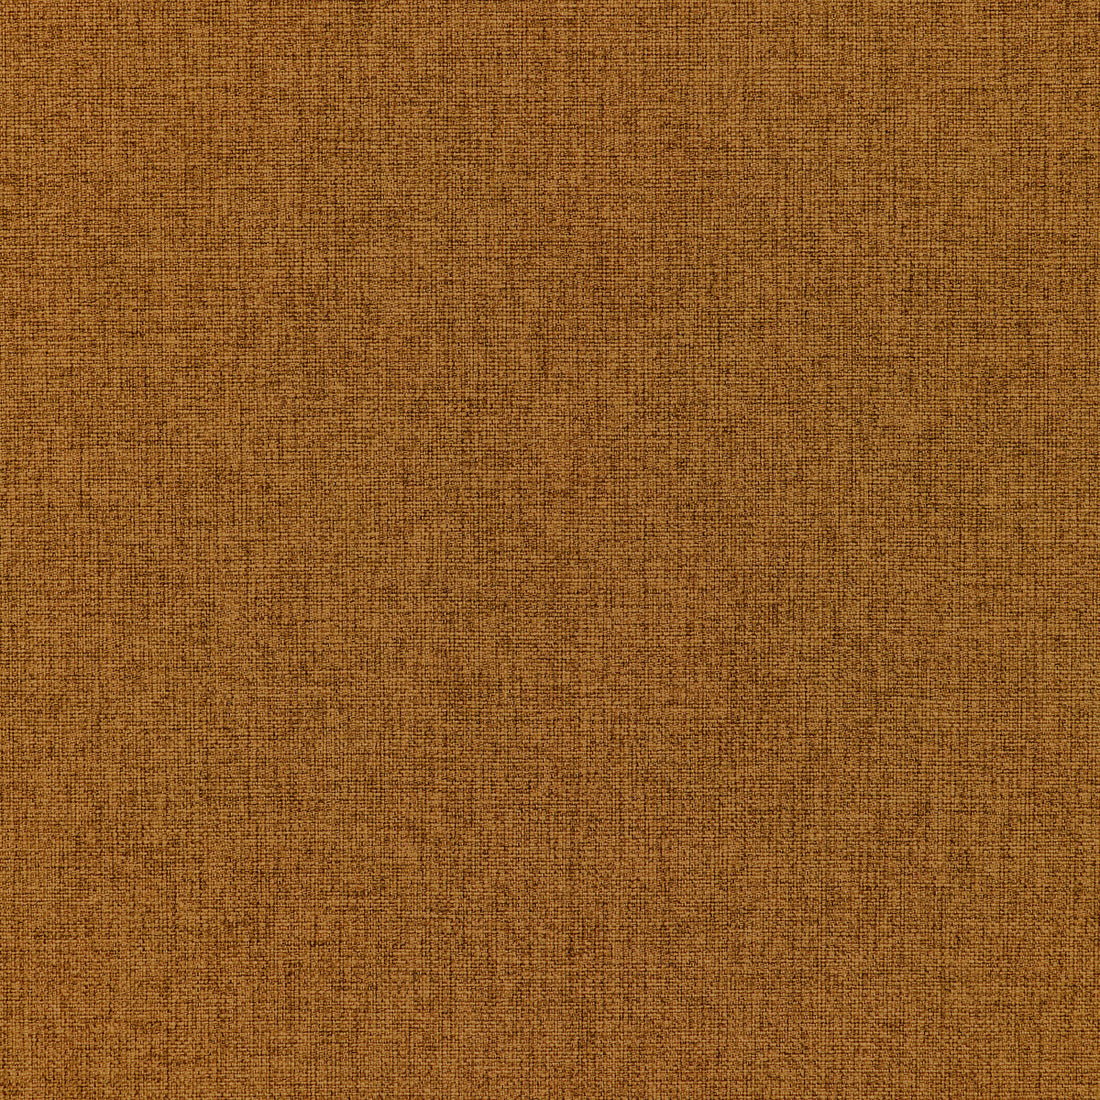 Fortify fabric in cognac color - pattern 36257.24.0 - by Kravet Contract in the Supreen collection